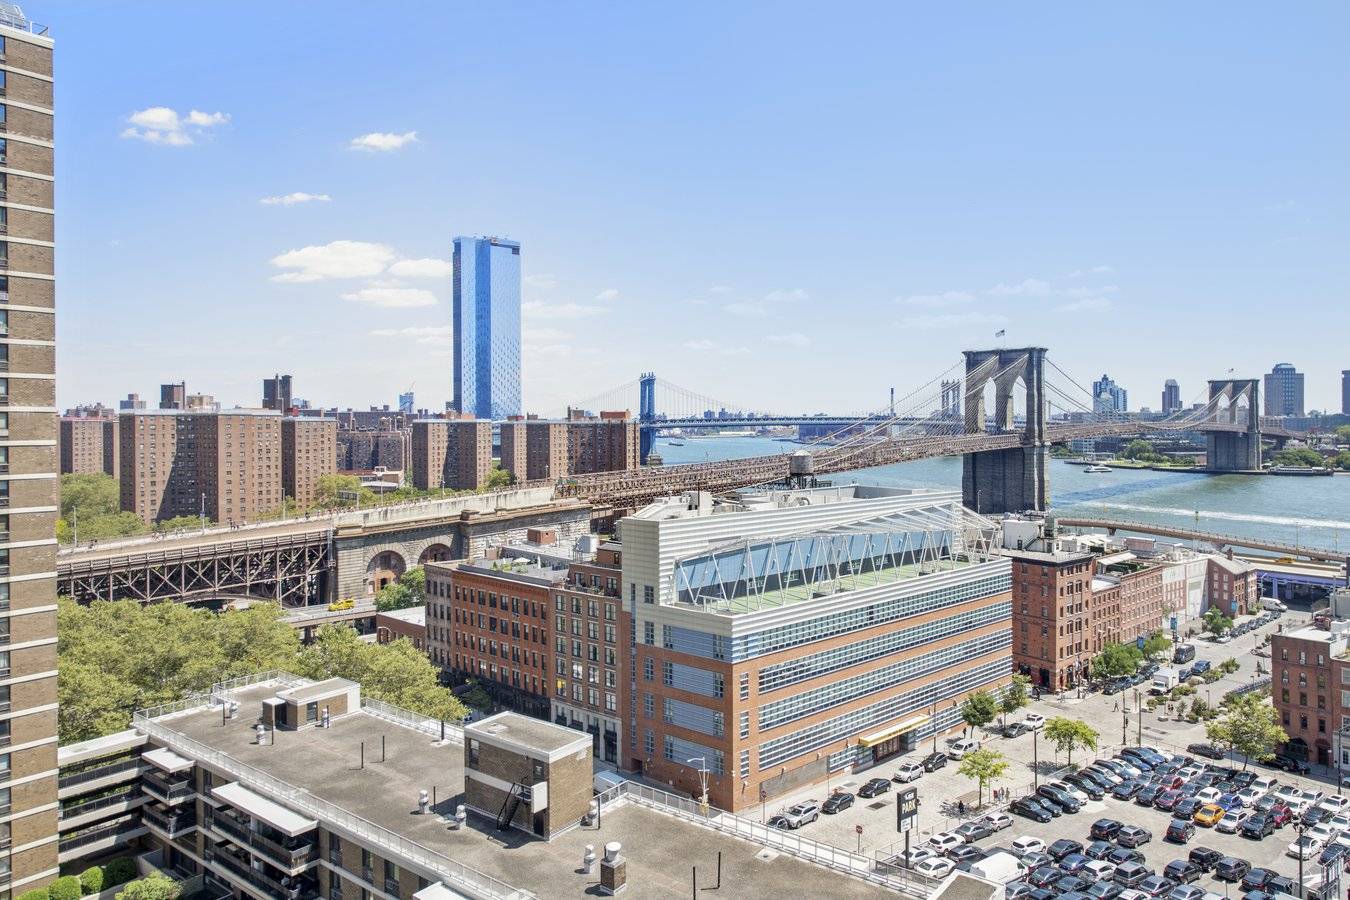 Welcome to unit 16M. Located in Fulton Seaport one of downtown Manhattan's most exciting neighborhoods, this one bedroom home offers a functional layout and loads of potential.